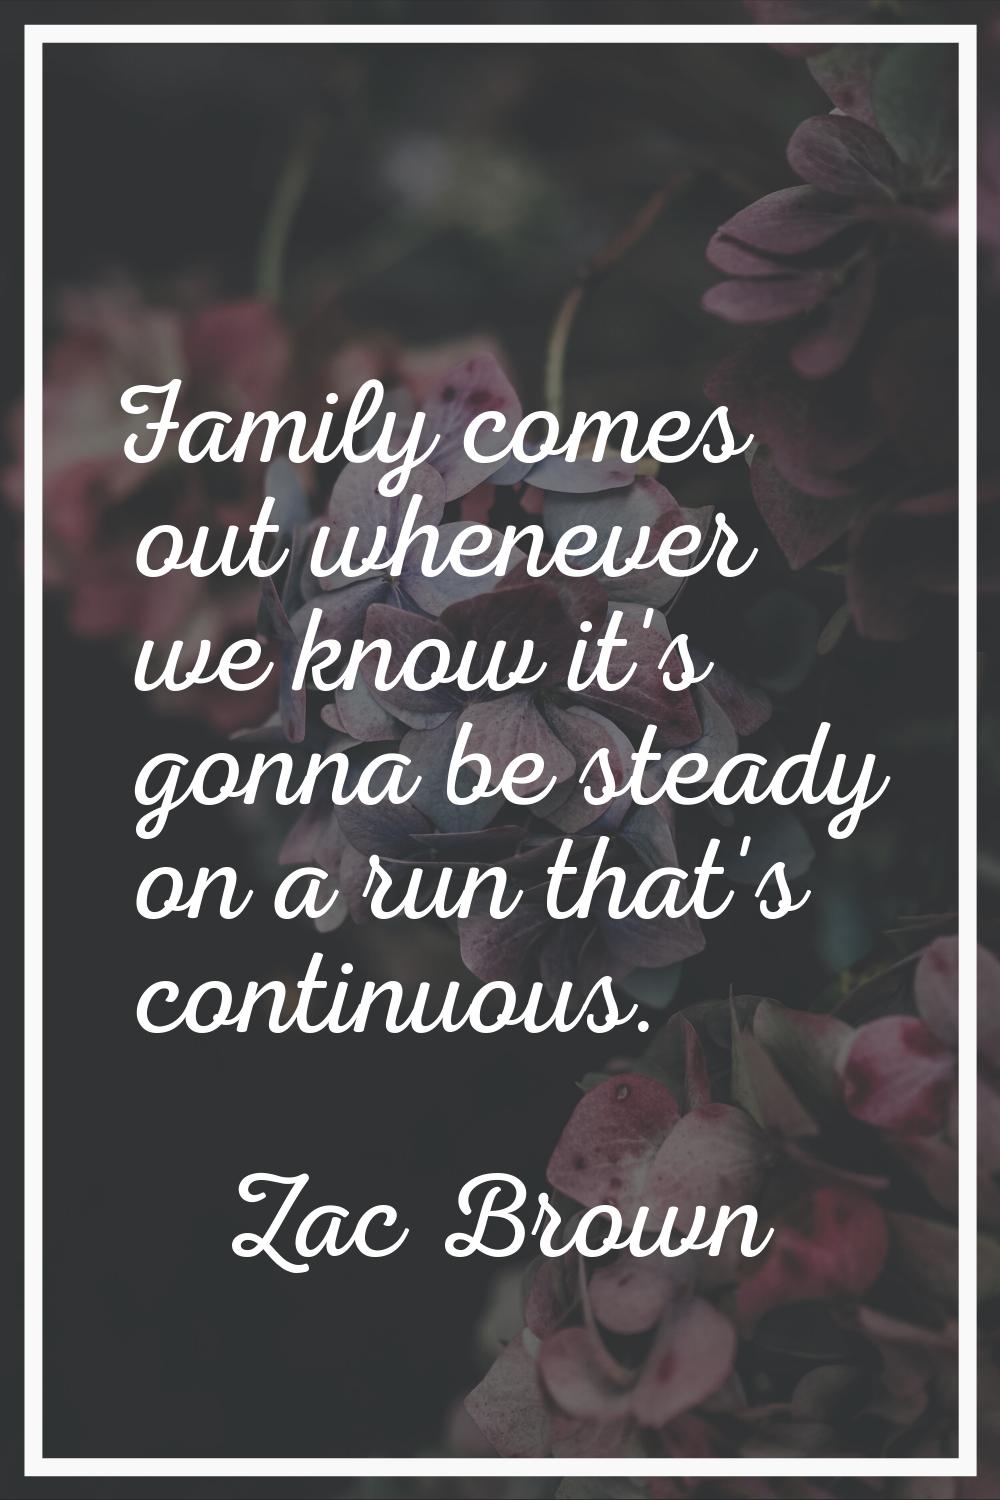 Family comes out whenever we know it's gonna be steady on a run that's continuous.